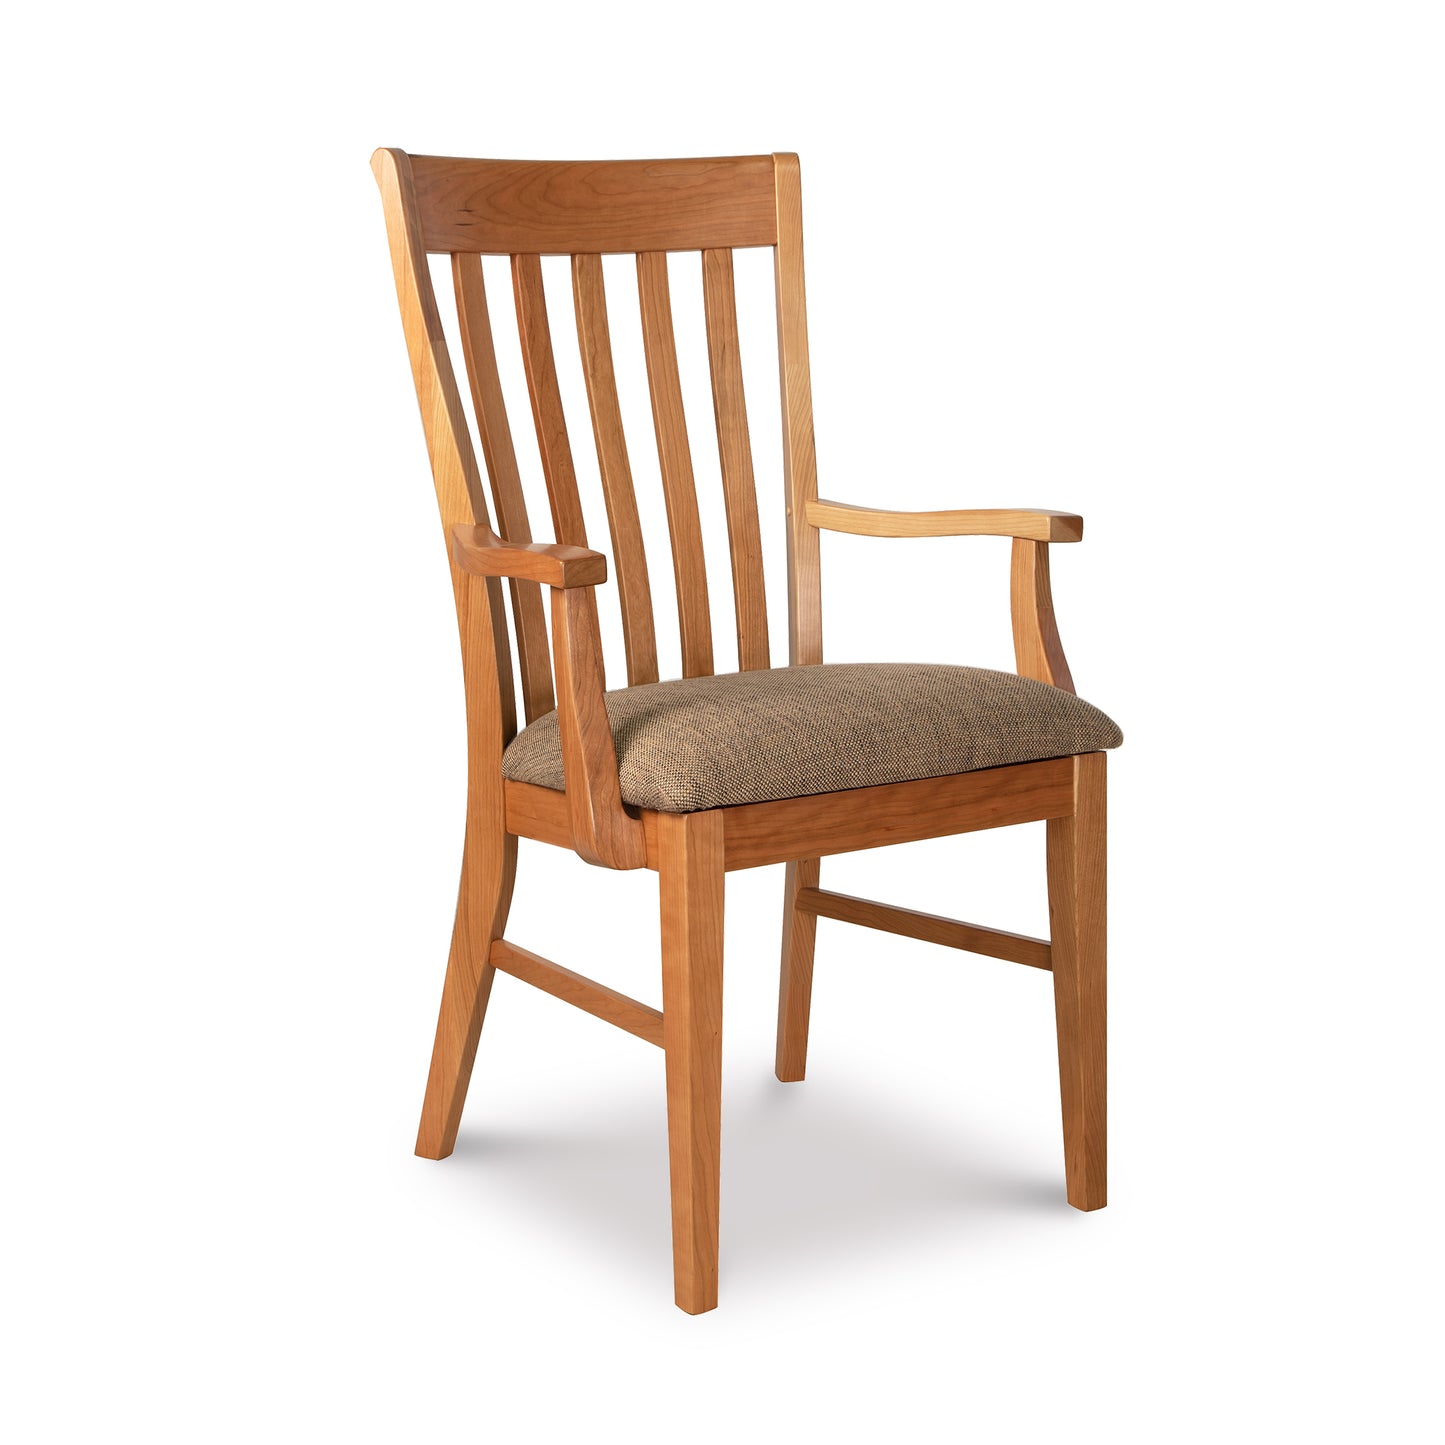 A Vermont Woods Studios Country Shaker Chair, a solid wood dining chair with armrests and a cushioned seat, featuring vertical slats on the ergonomic seat back. The chair is set against a white background.